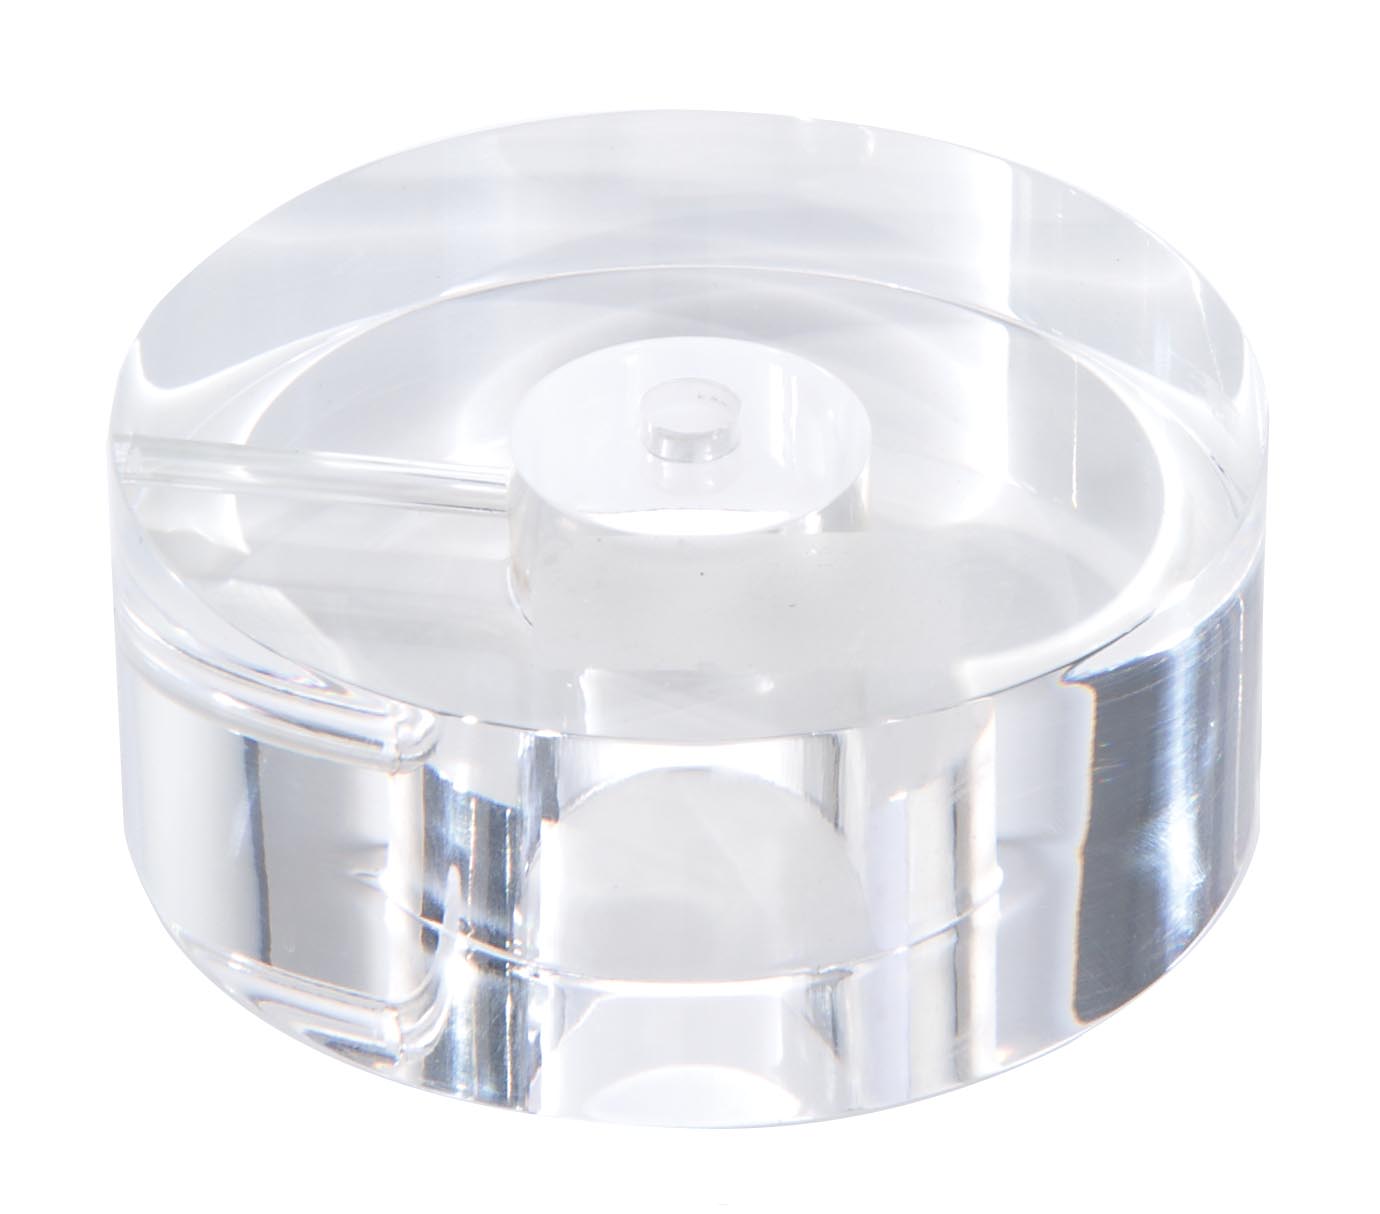 2" Thick, Round, Clear Acrylic Lamp Bases - CHOICE of 5 Sizes